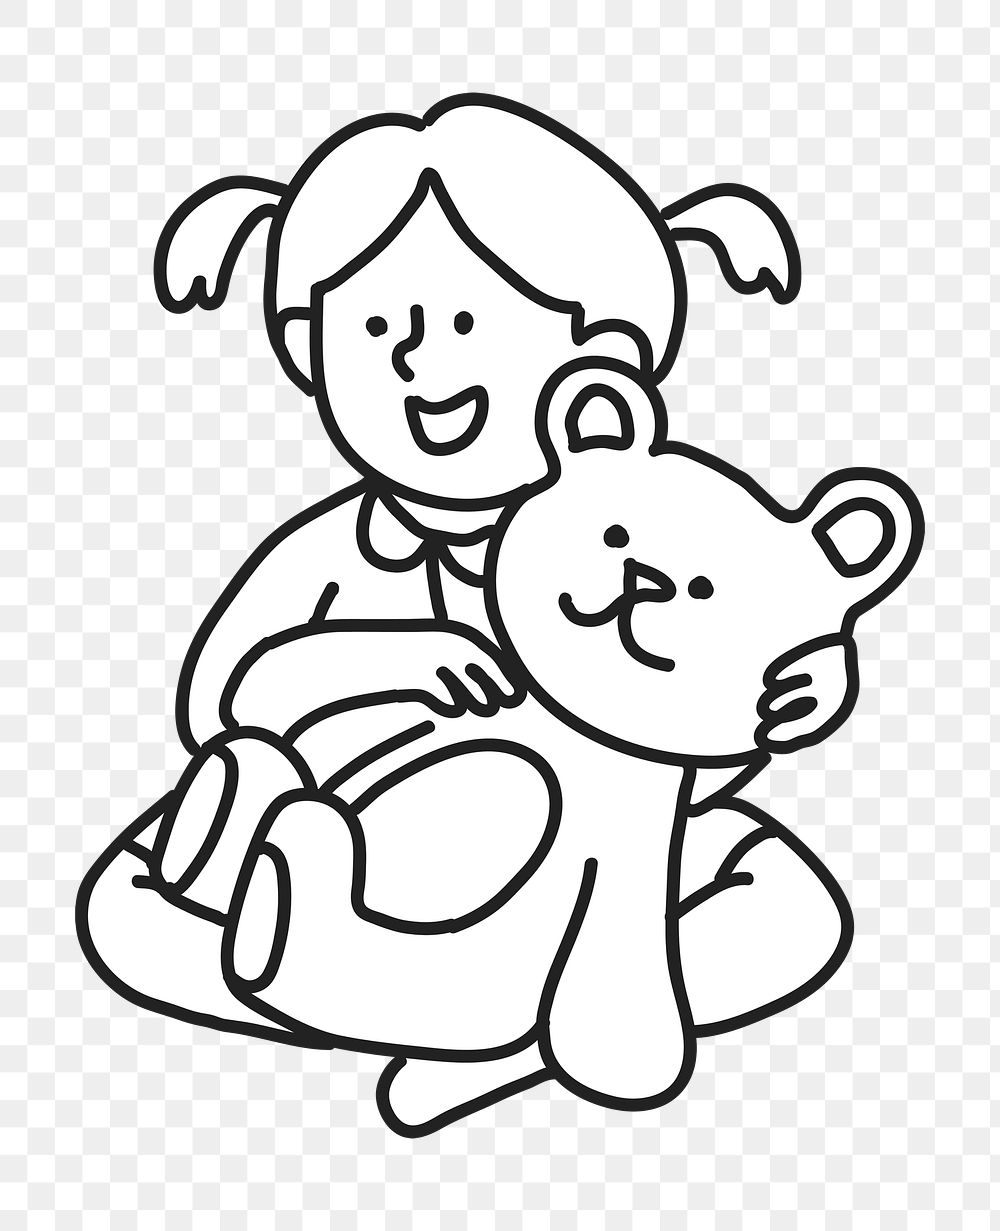 PNG Little girl with teddy bear line art sticker, transparent background